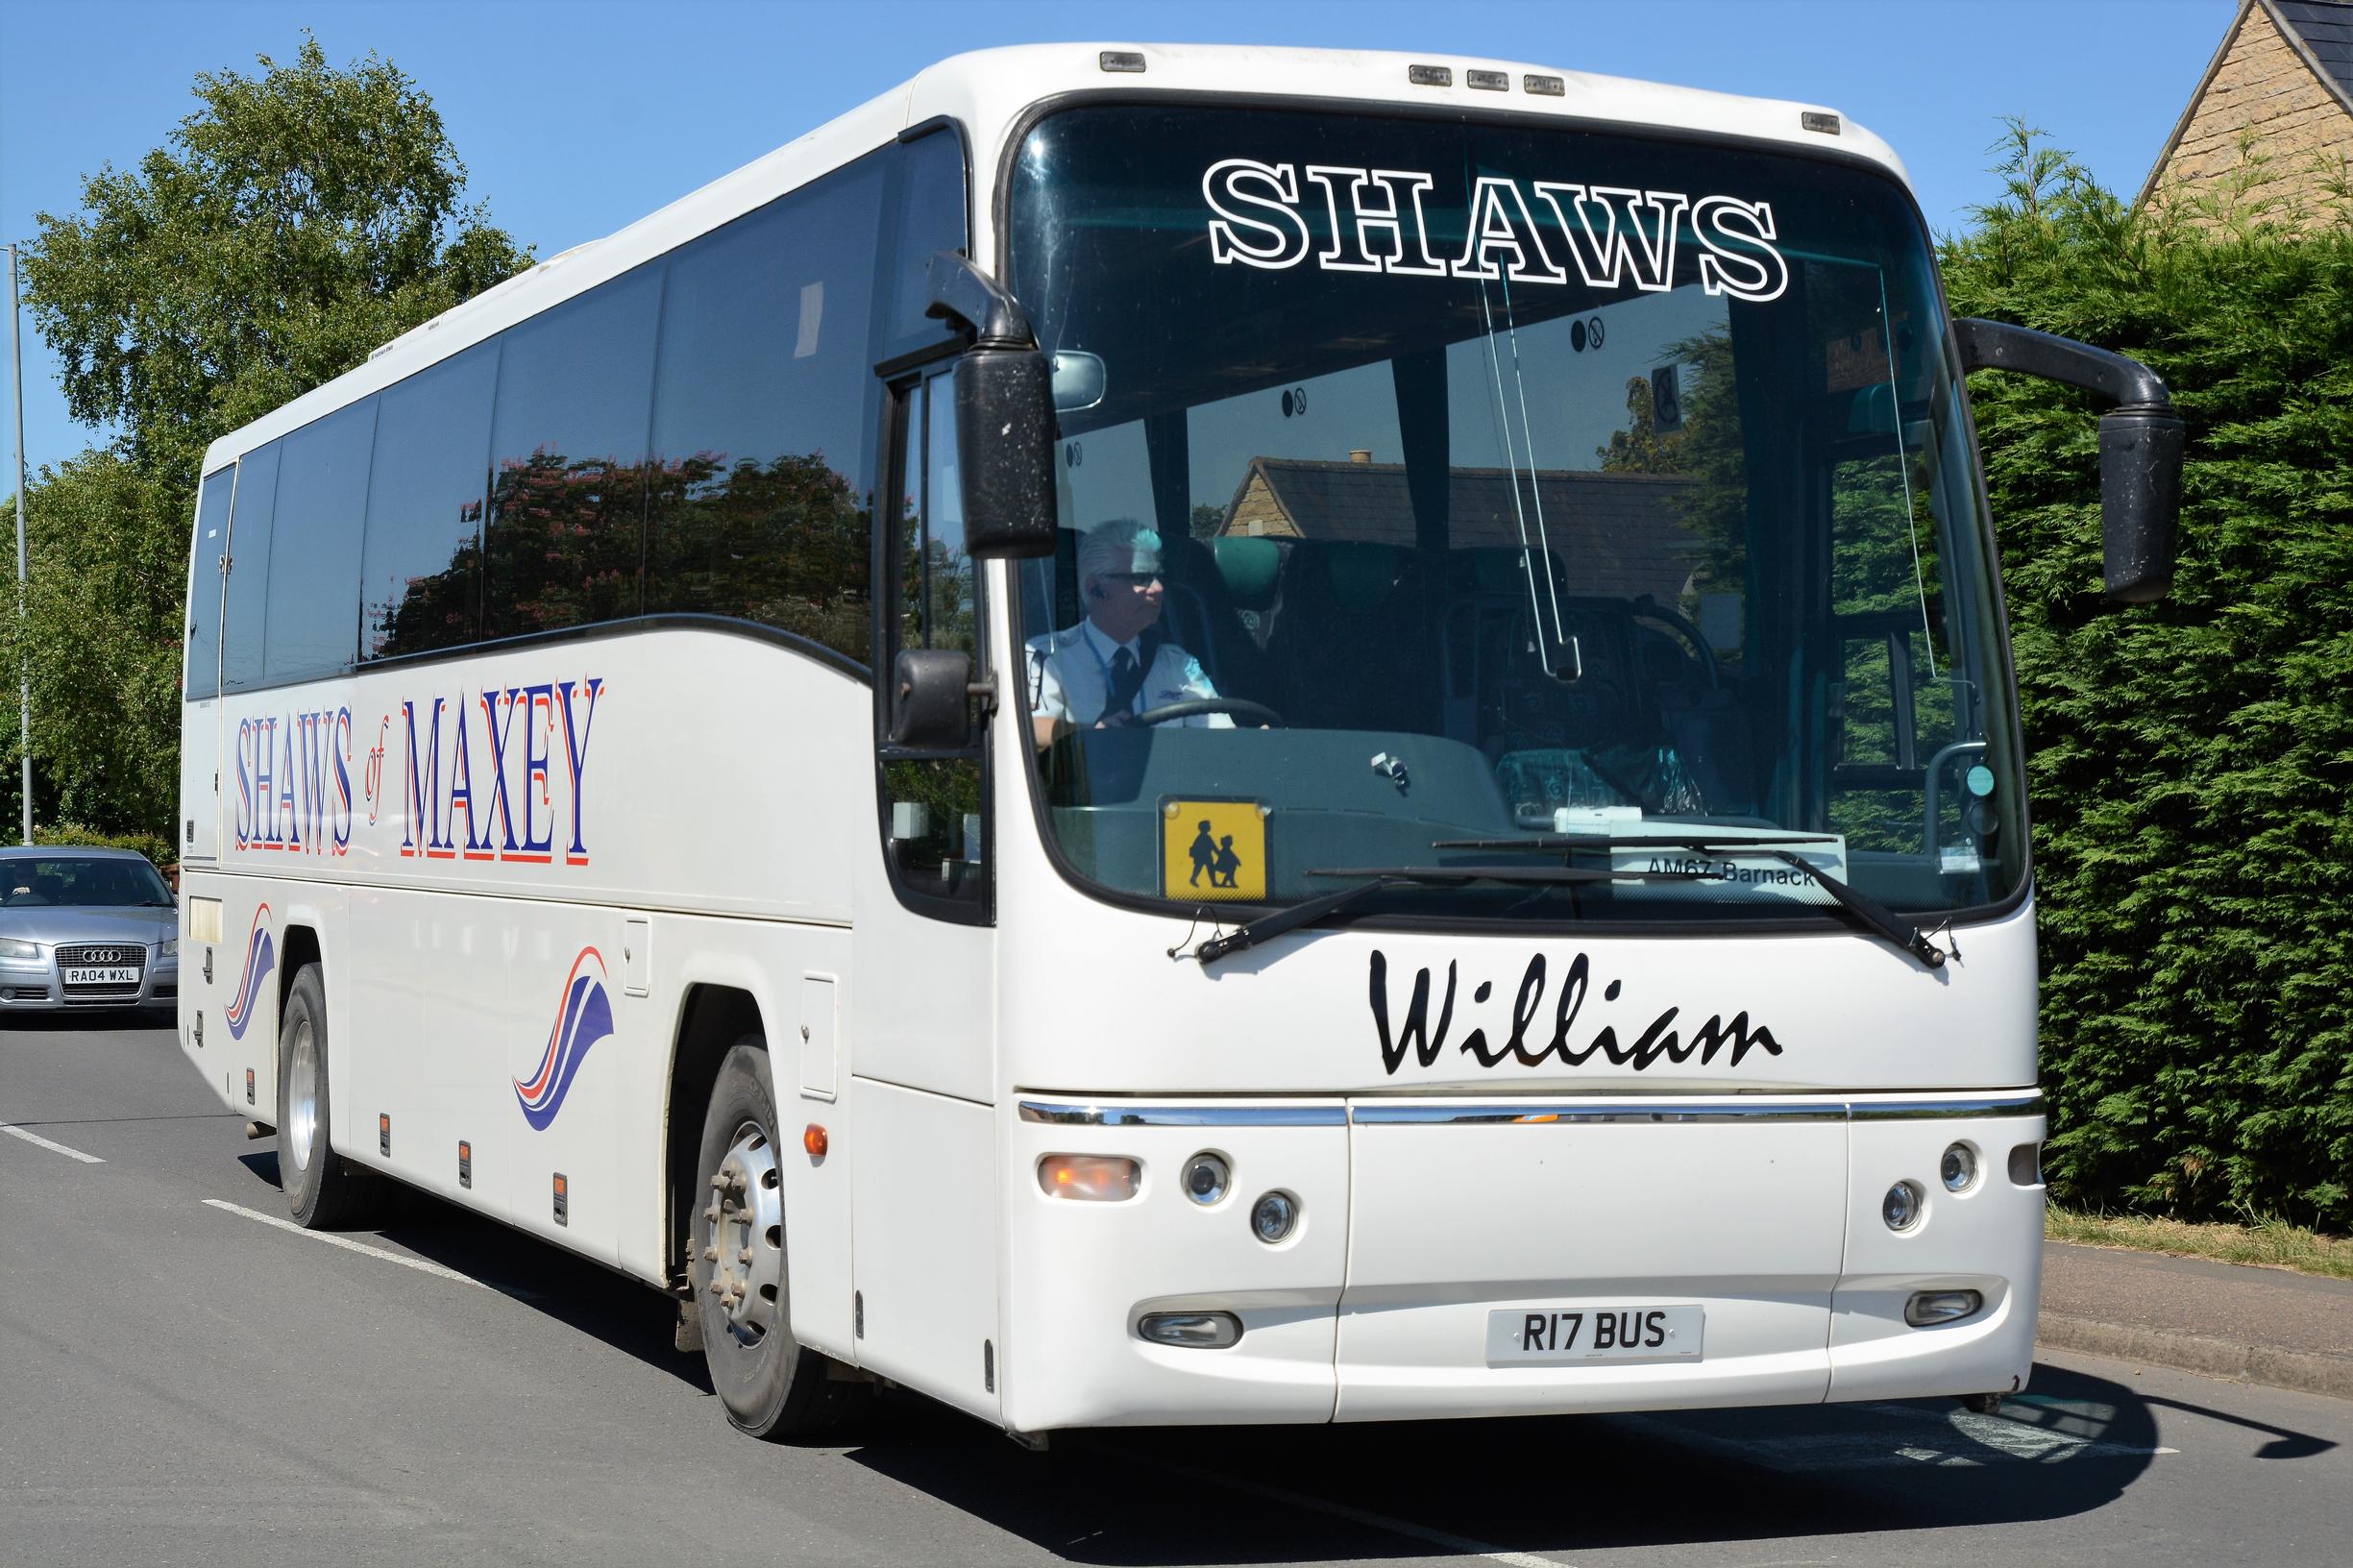 Funding will boost school transport. This coach is operating on a schools service near Peterborough